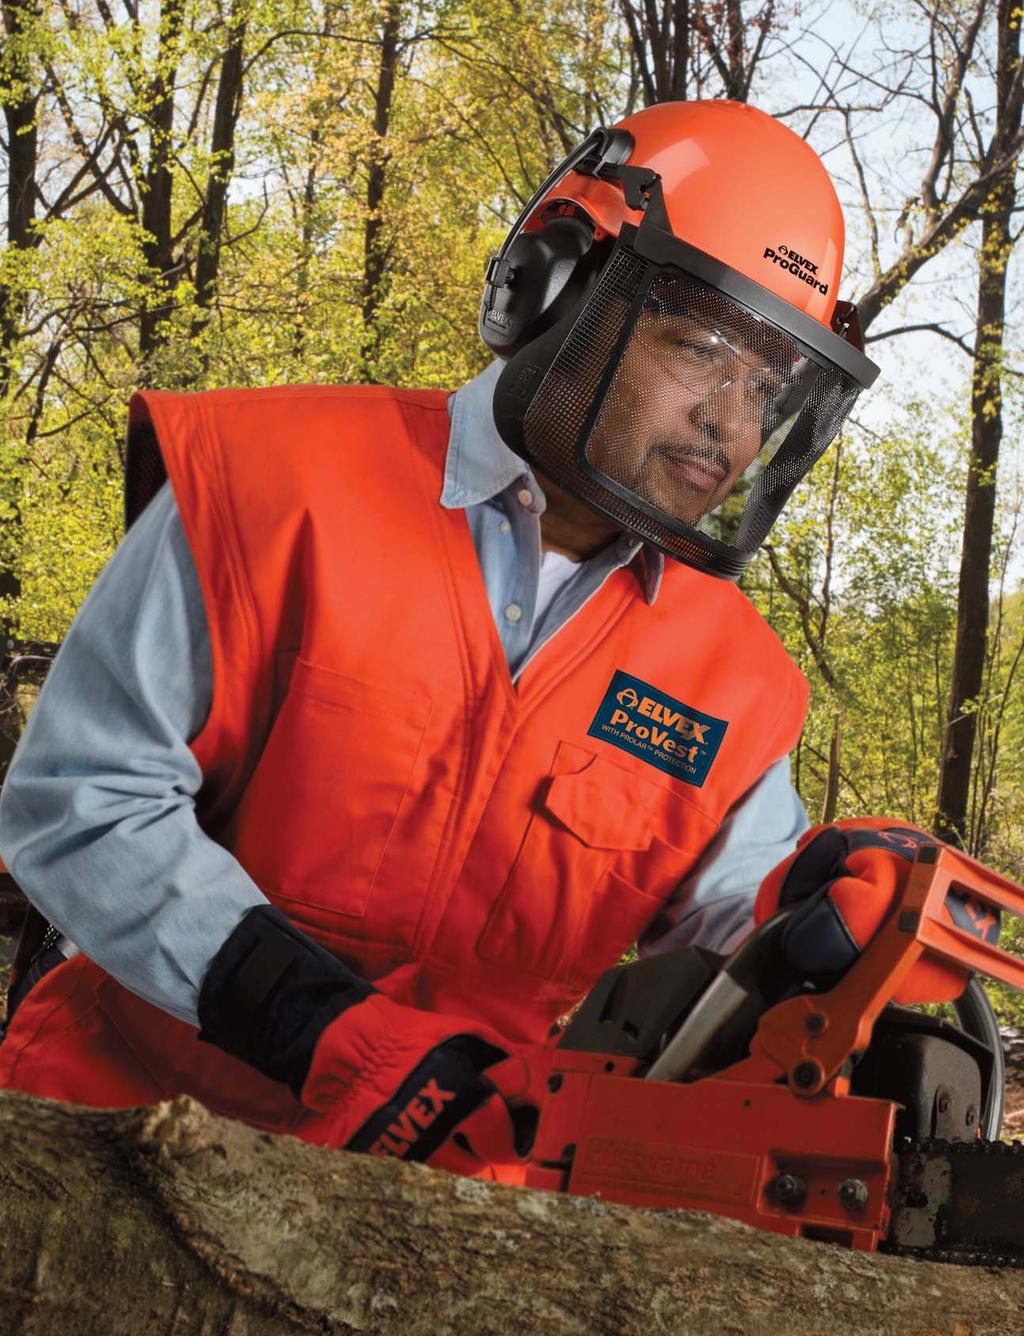 CHAIN SAW PROTECTION Chain Saw Safety Series: Head-to-leg protection designed by professionals HEARING 19-22 EYE 11-18 CHAIN SAW 3-10 Danger is ever present, and that makes safety and reliability